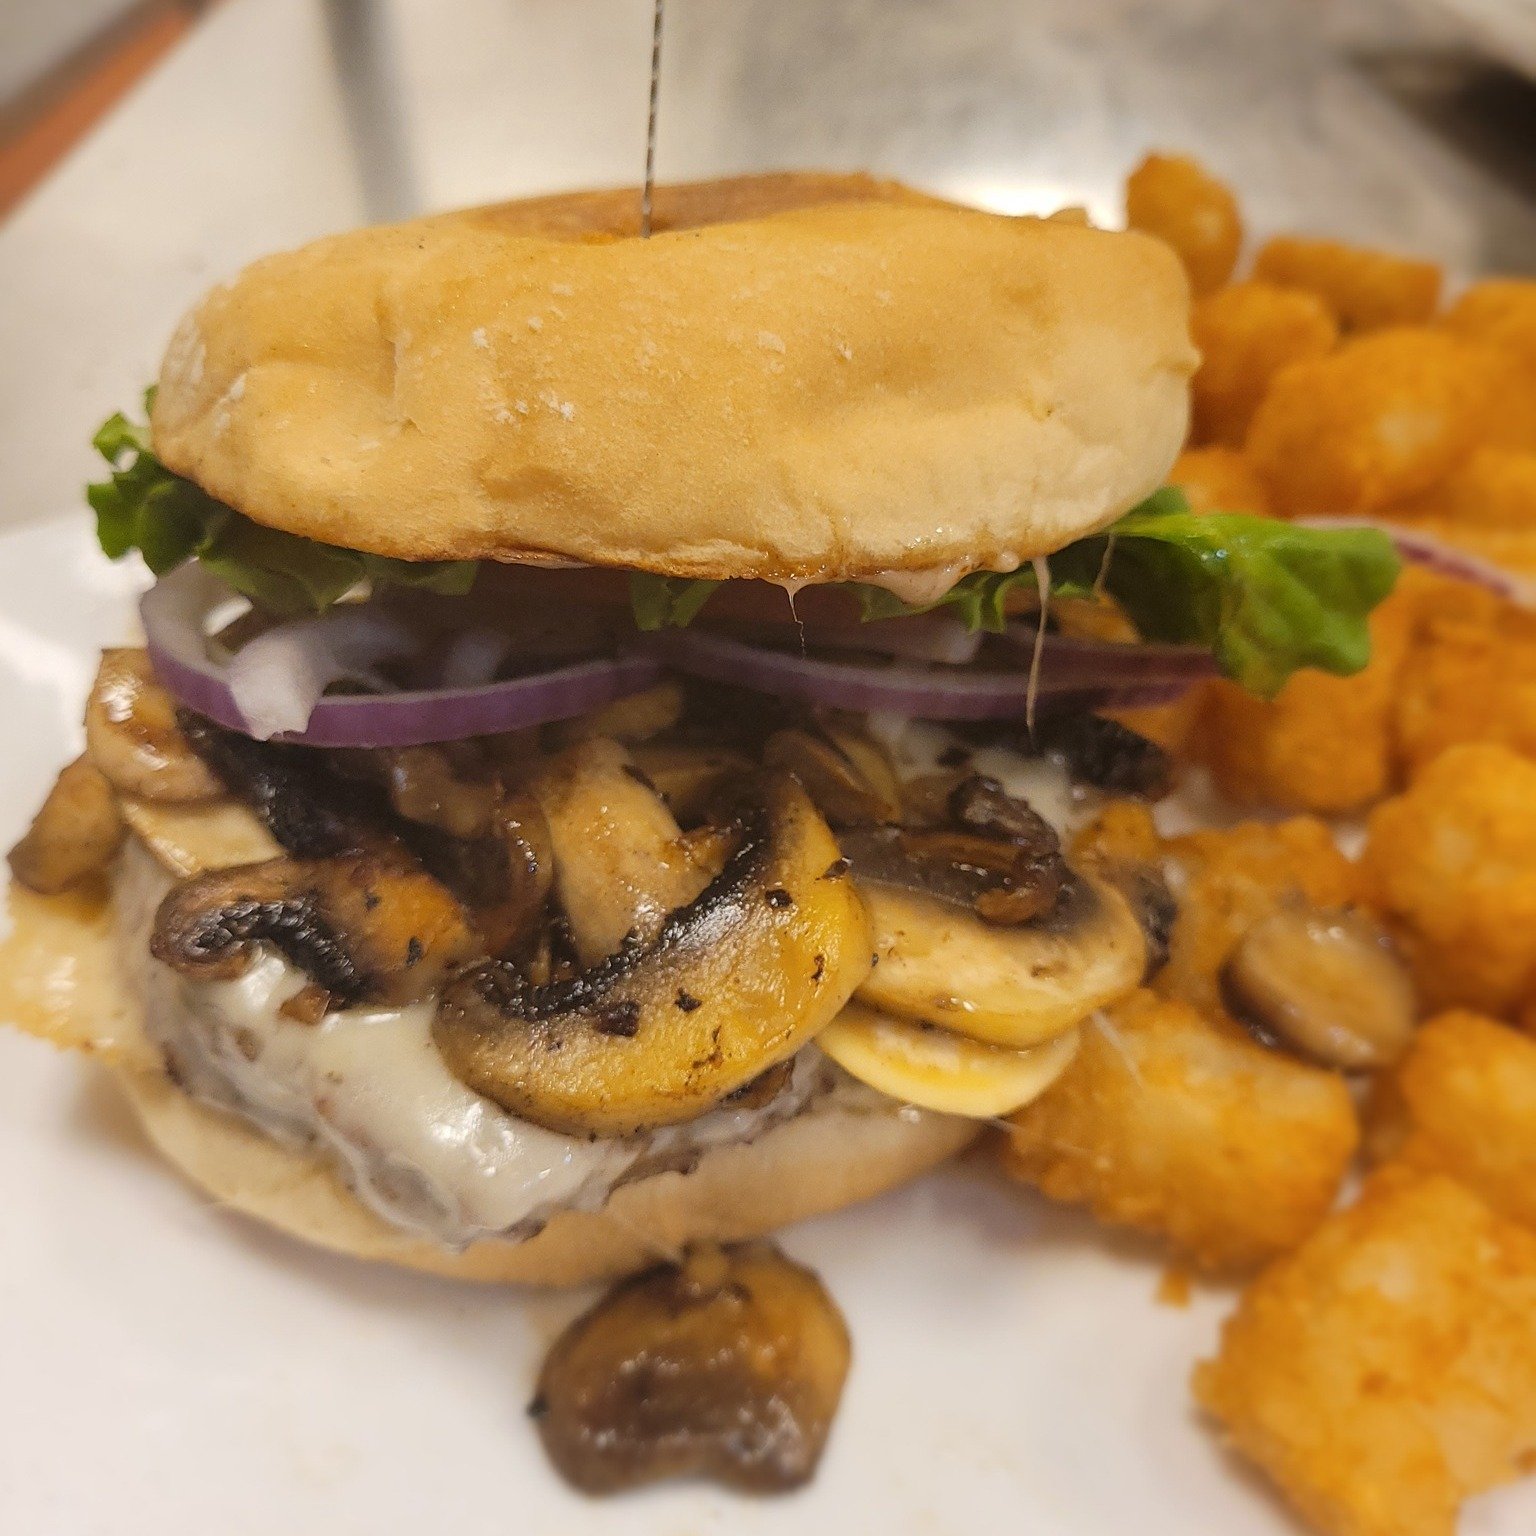 🍔 Feast on the flavors of our Mushroom Swiss Burger! Juicy beef meets saut&eacute;ed mushrooms and melty Swiss cheese, sandwiched in a toasted brioche bun. 

Every bite is a blend of savory goodness.

📌 405 Silver St, Elko
📞 (775) 777-7931

#local